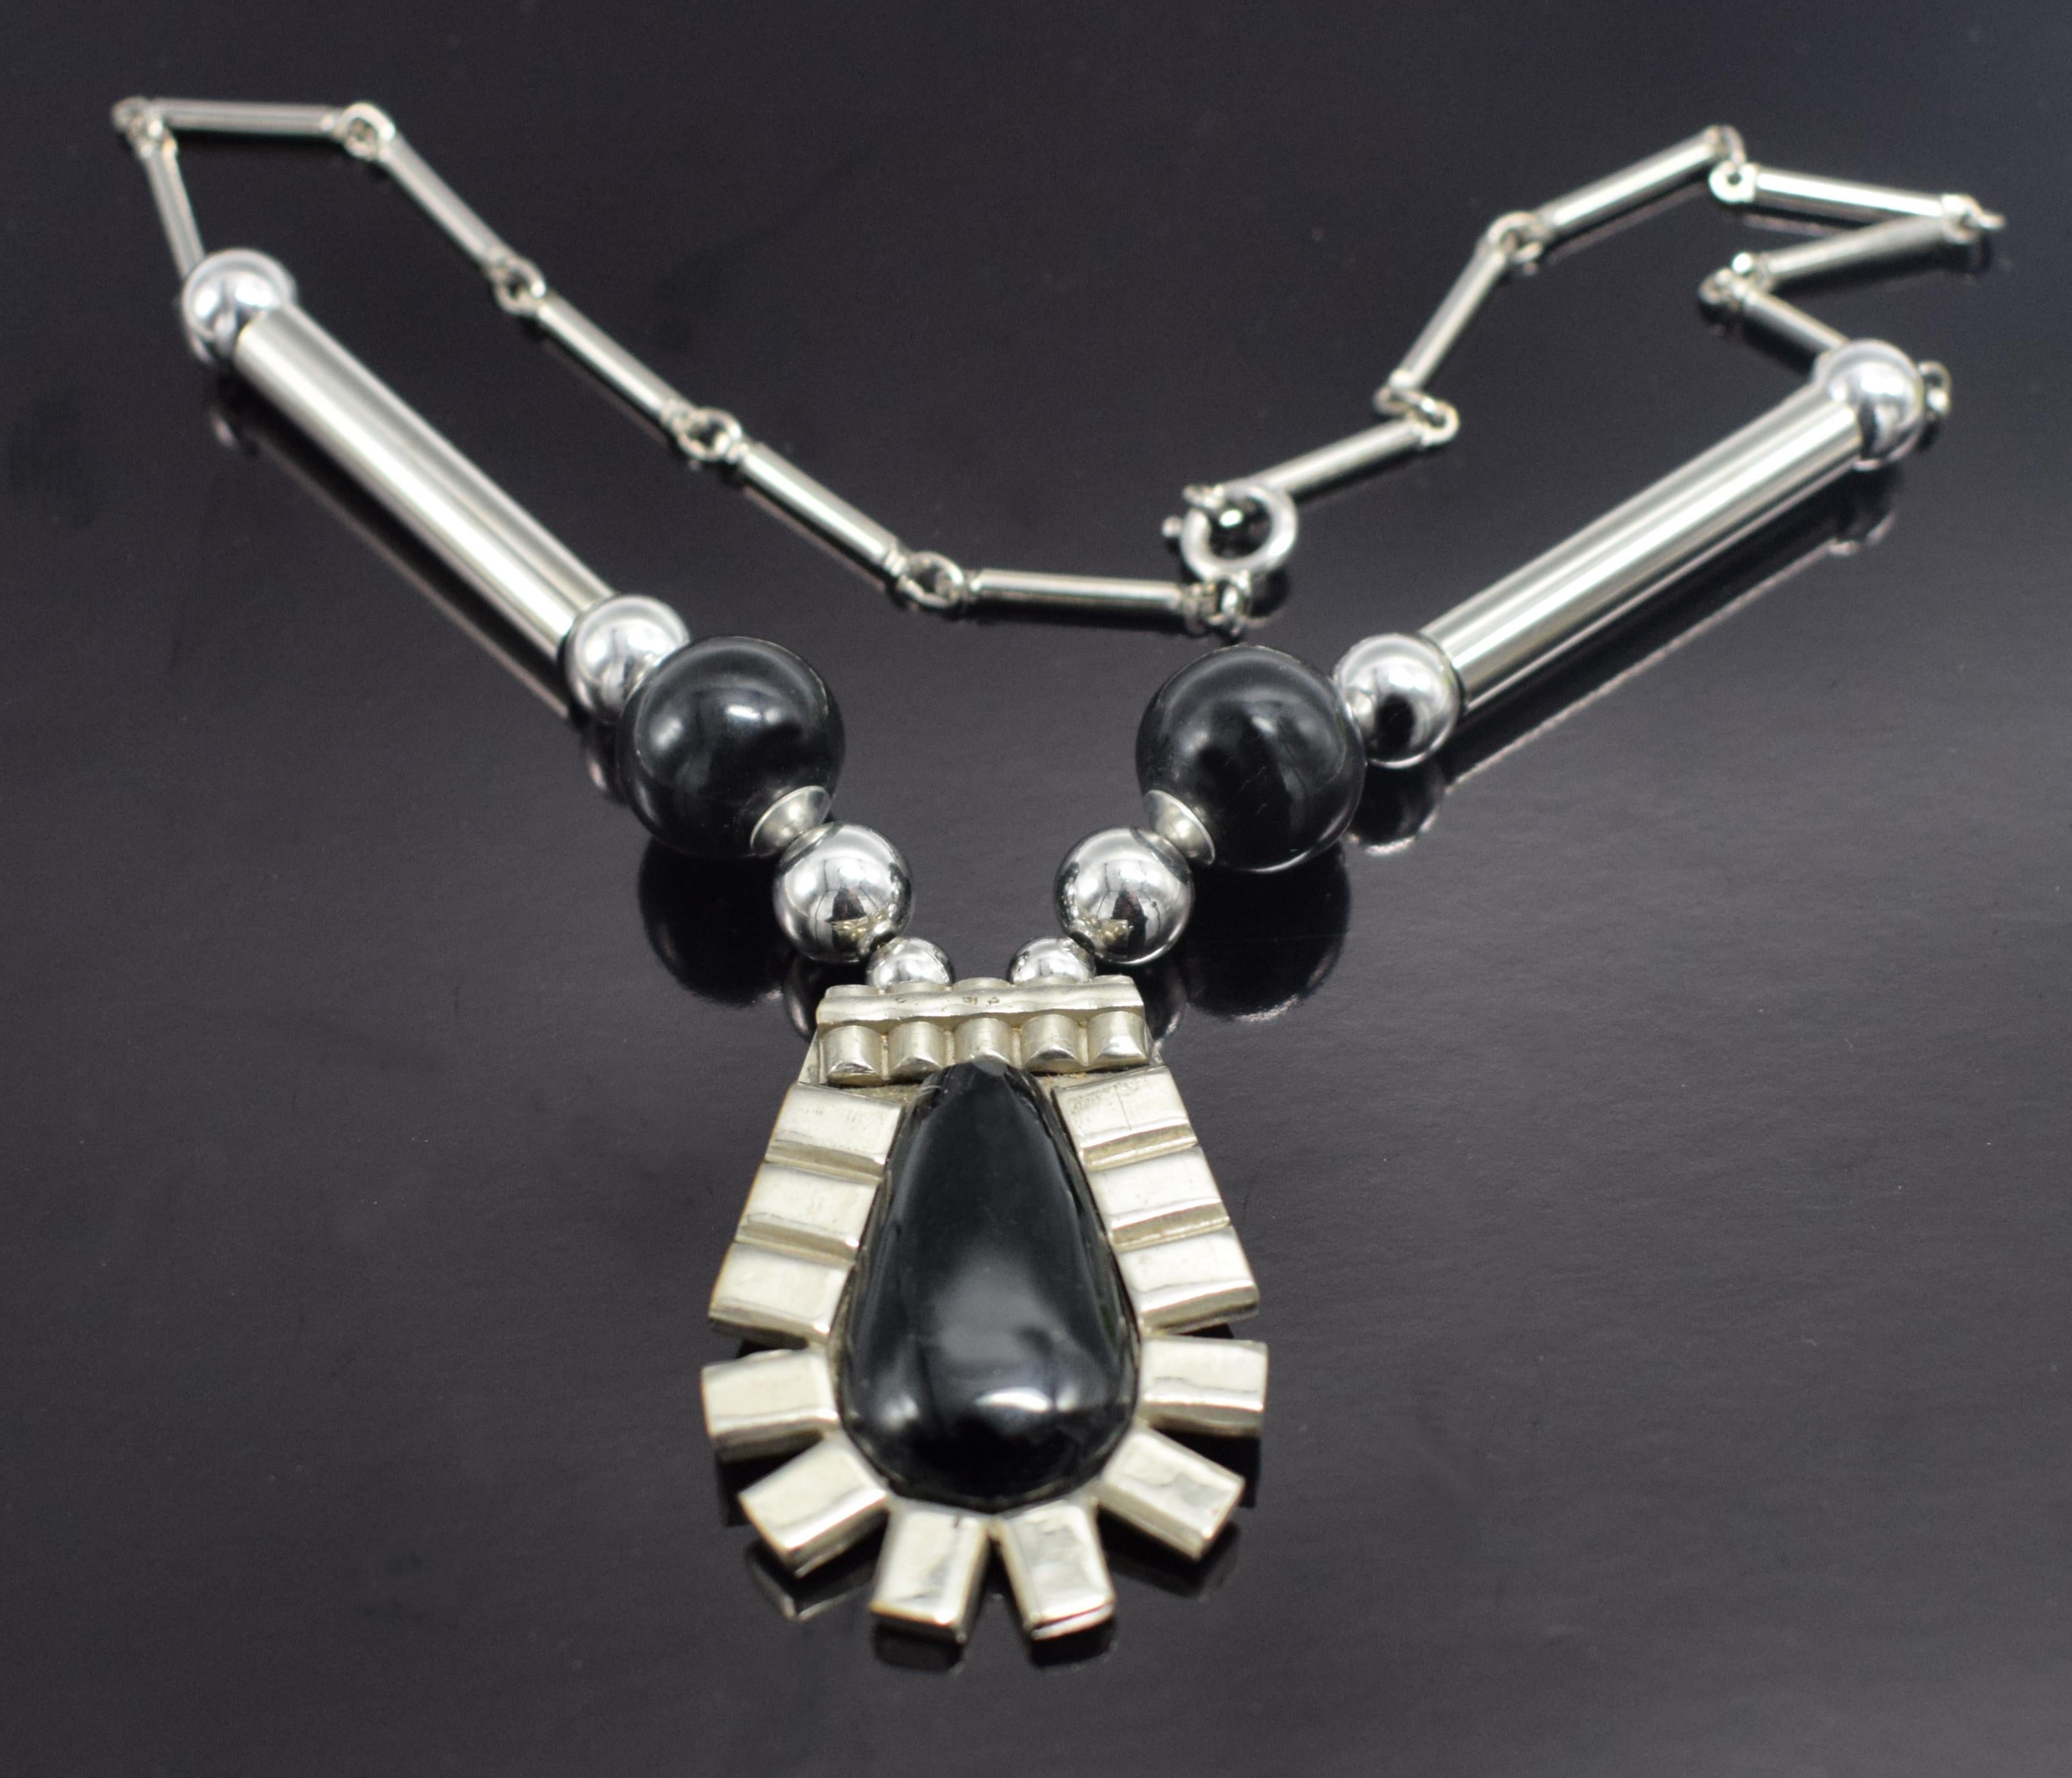 Classic and very high quality ladies Art Deco Modernist necklace by Jakob Bengel dating to the 1930's. Features black glass tear drop centre stone with fan shaped panels of chrome surround. Jakob Bengel was one of the leading manufacturers of Art